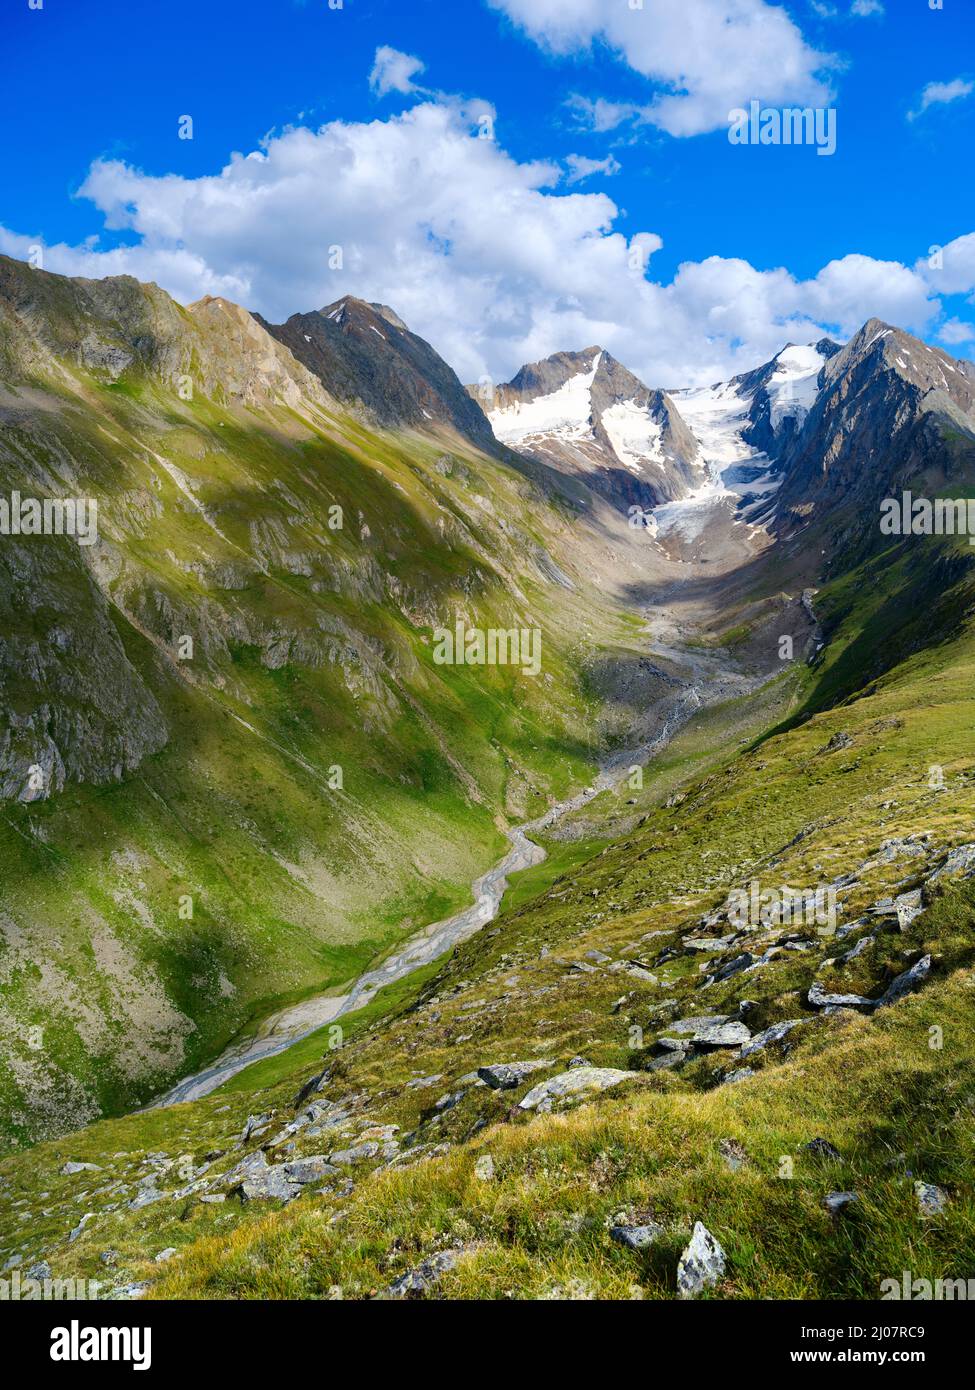 Valley Gaisbergtal seen from Mt. Hohe Mut. Oetztal Alps in the nature park Oetztal near village Obergurgl. Europe, Austria, Tyrol Stock Photo